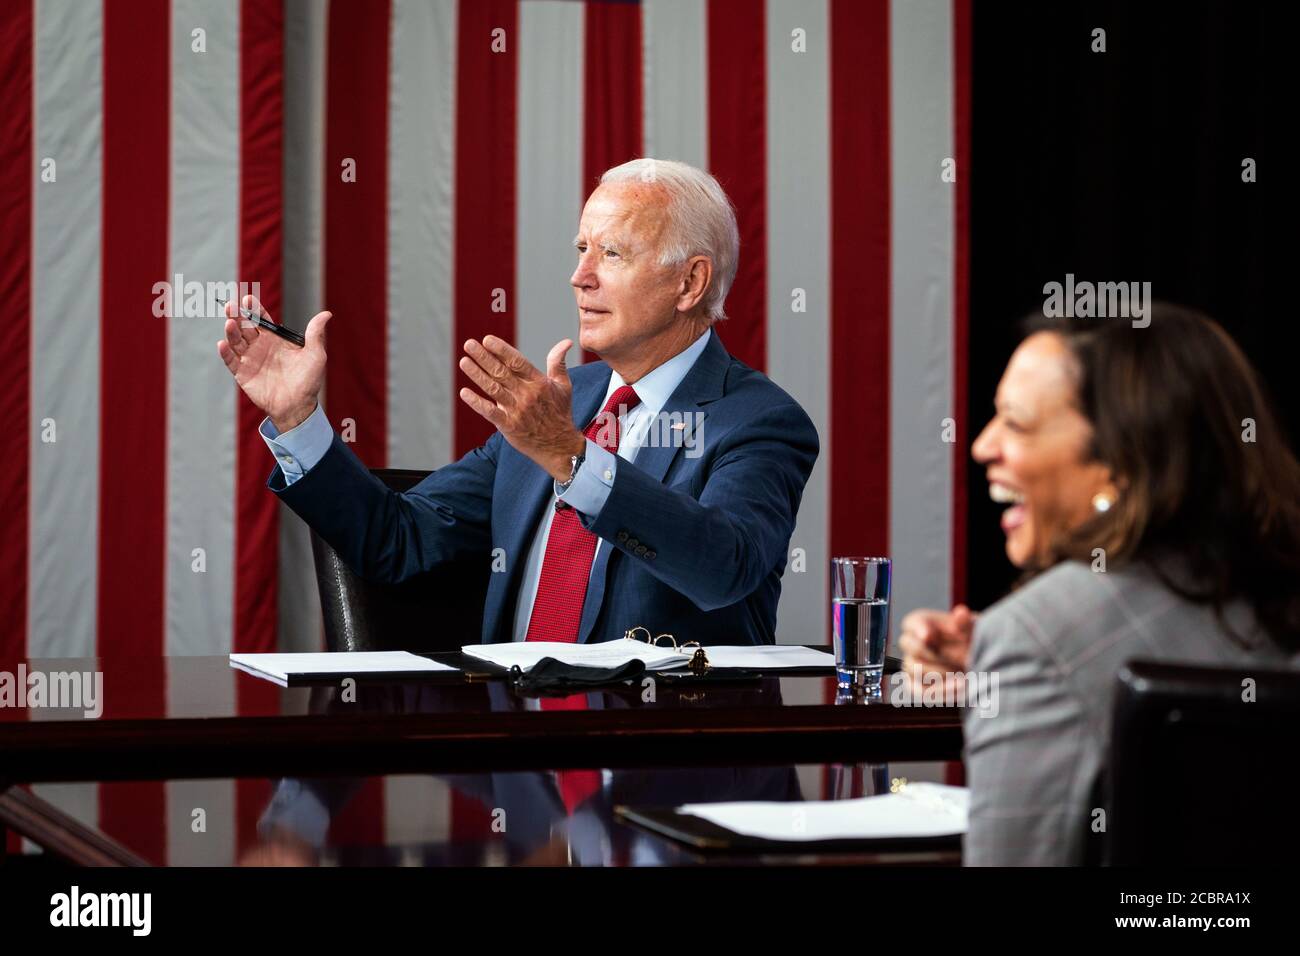 WILMINGTON, DELAWARE, USA - 13 August 2020 - US Presidential candidate Joe Biden with Kamala Harris talks at the State of COVID-19 briefing in Wilming Stock Photo